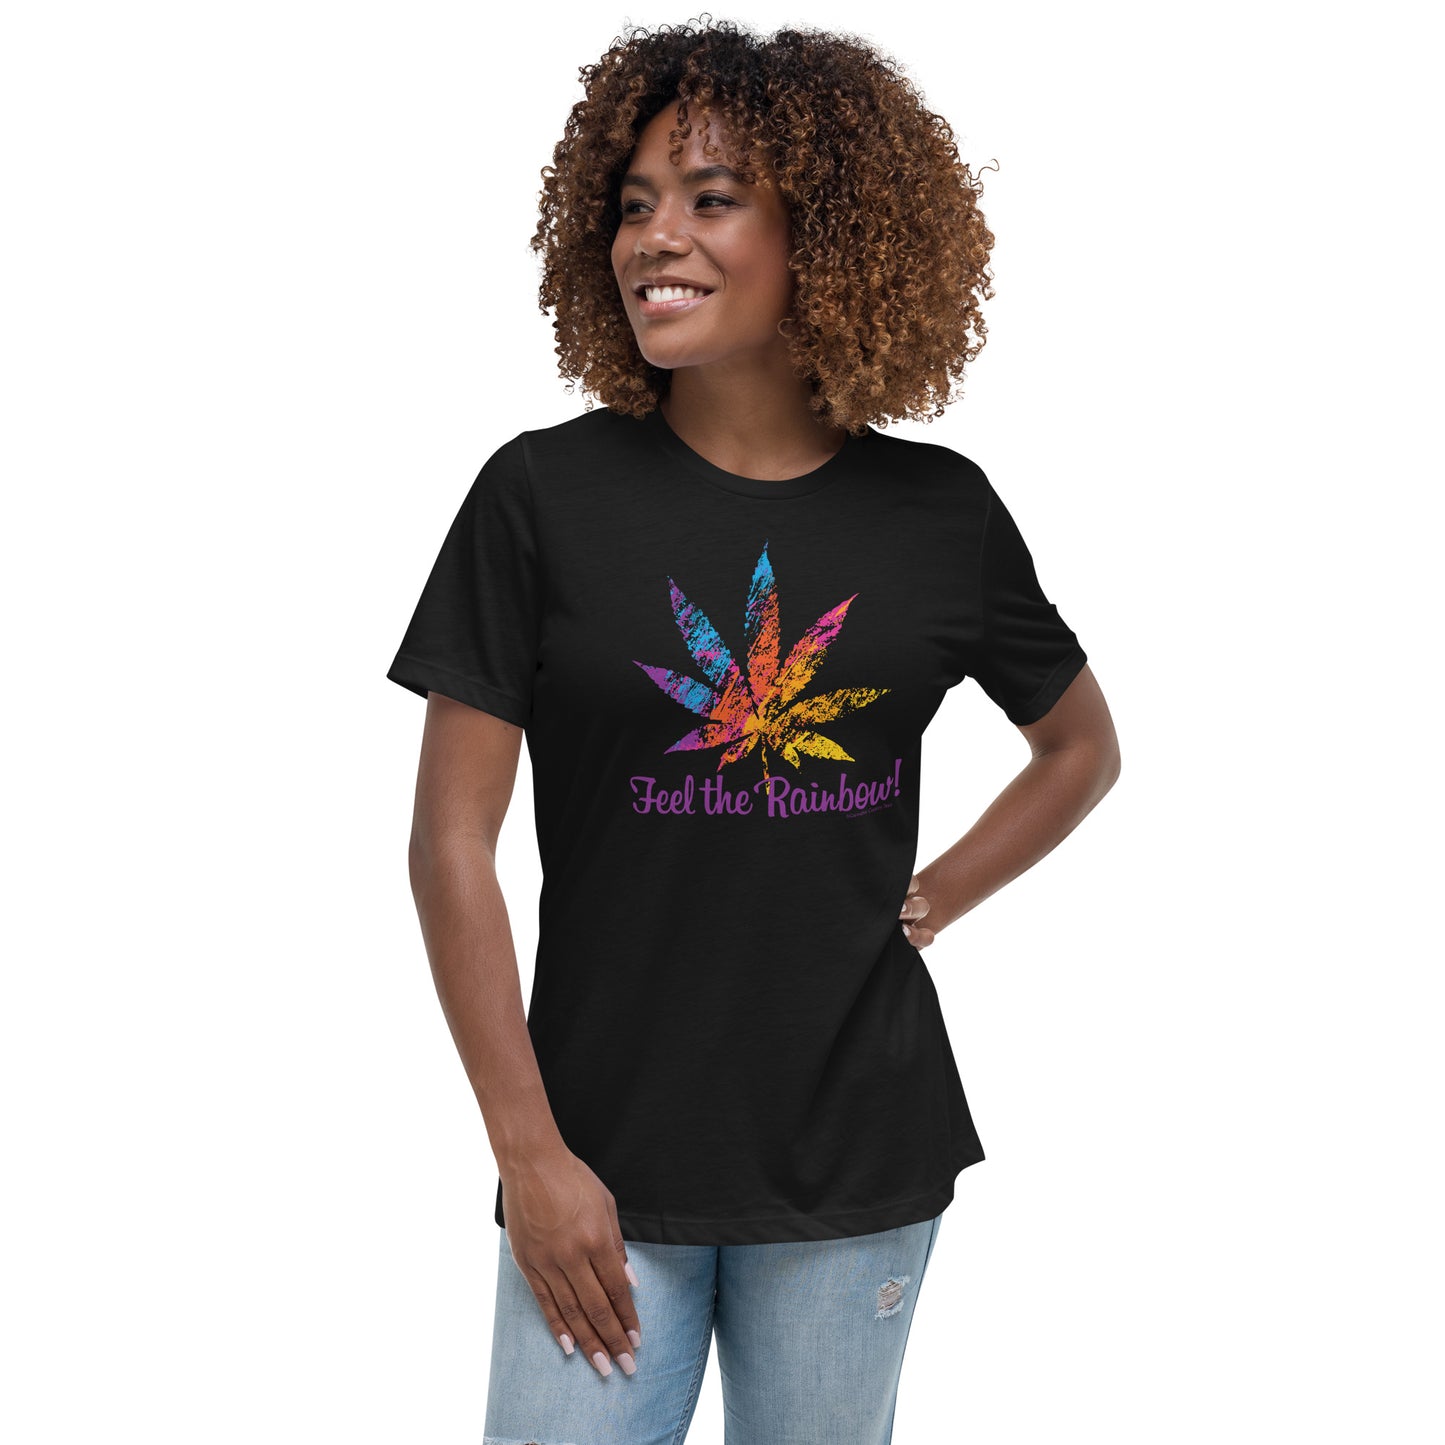 Feel the Rainbow Women's Relaxed T-Shirt